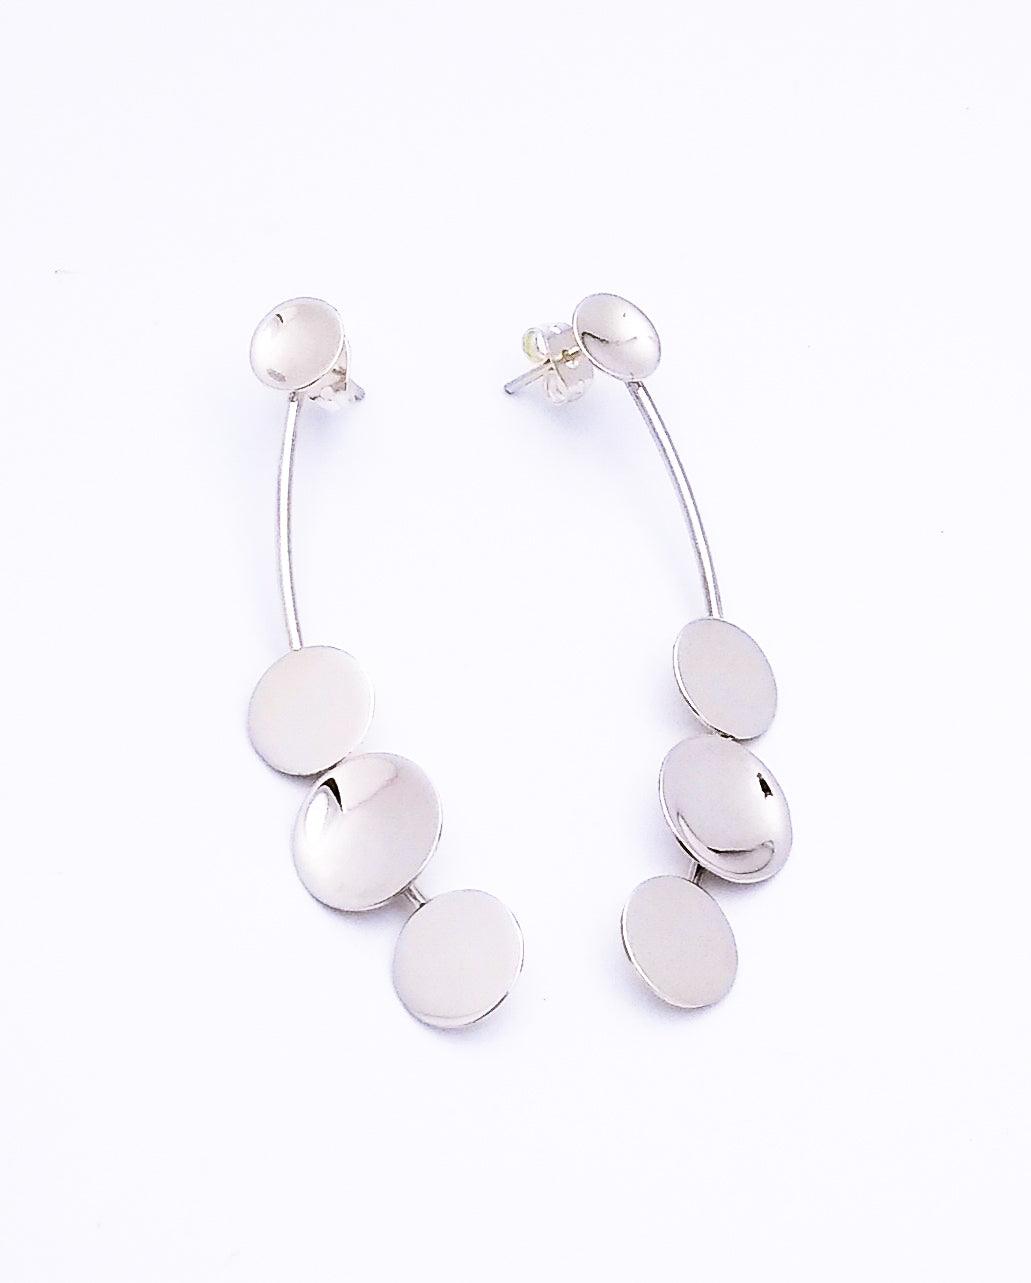 Sterling silver post earrings that dangle from the bottom with three silver discs at the bottom, and one disc at the top/